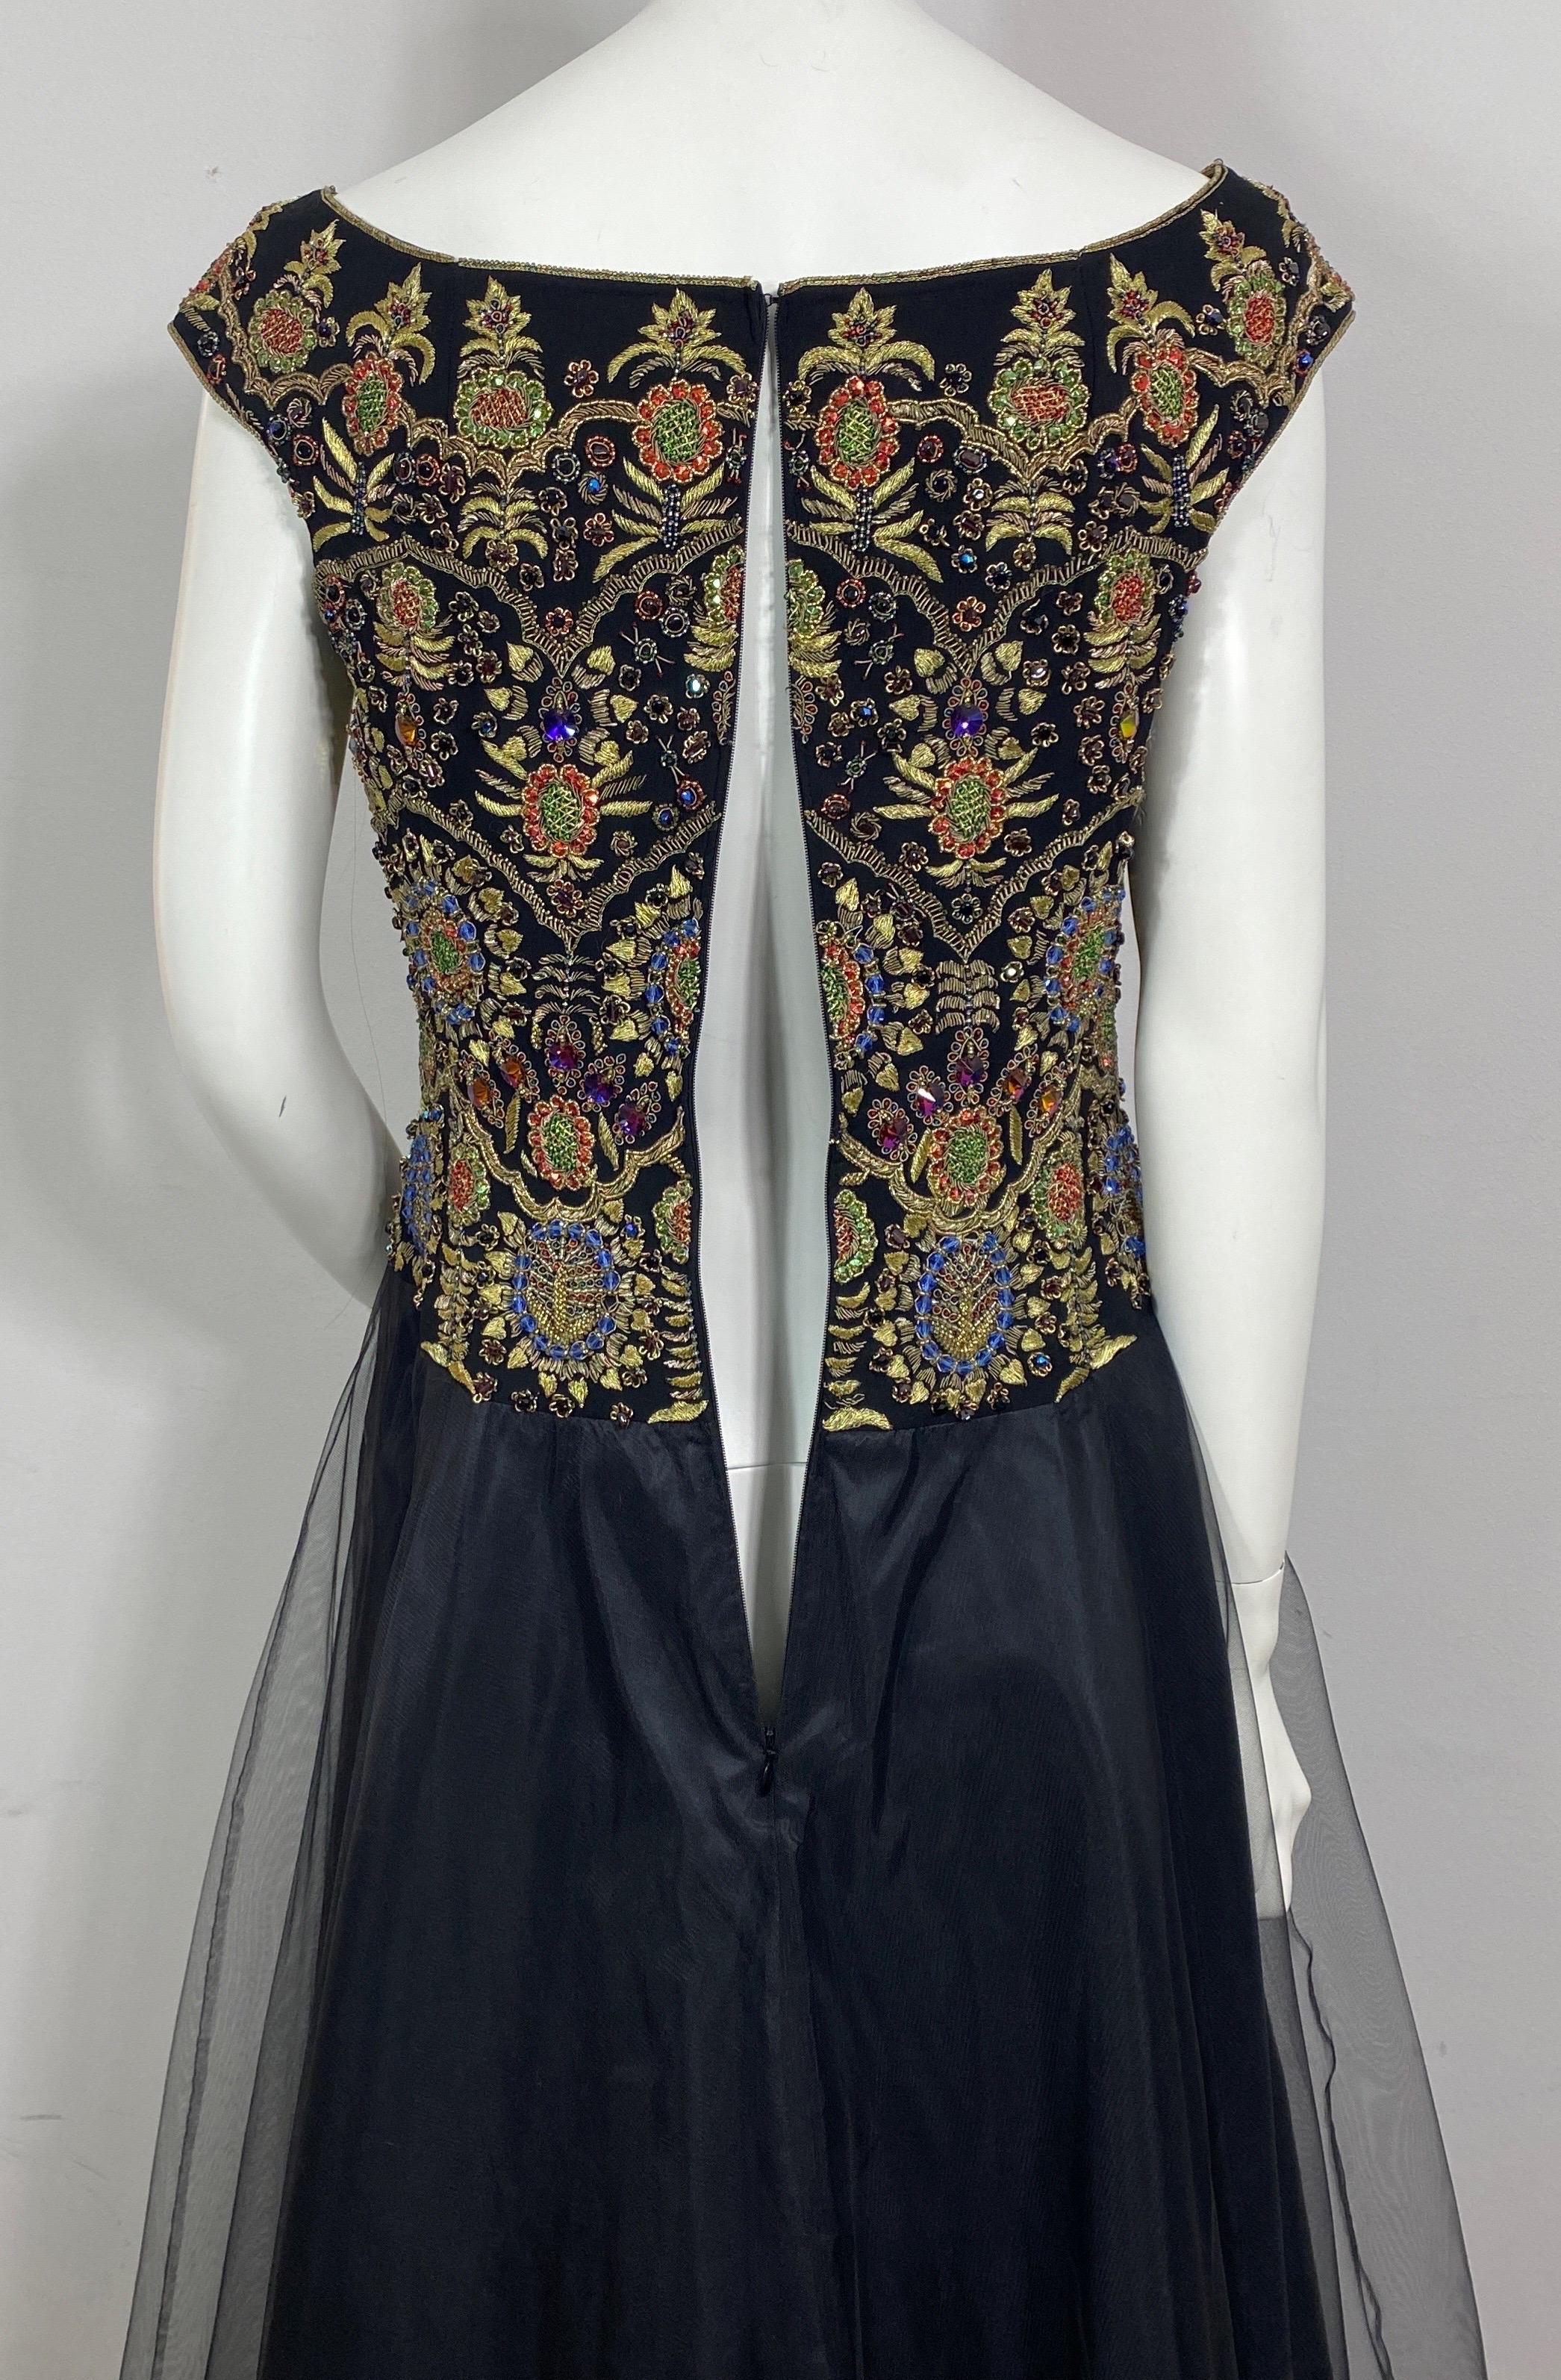 Escada 1990’s Black Silk and Tulle Gown w/ Heavily Beaded Bodice - Size 38 For Sale 9